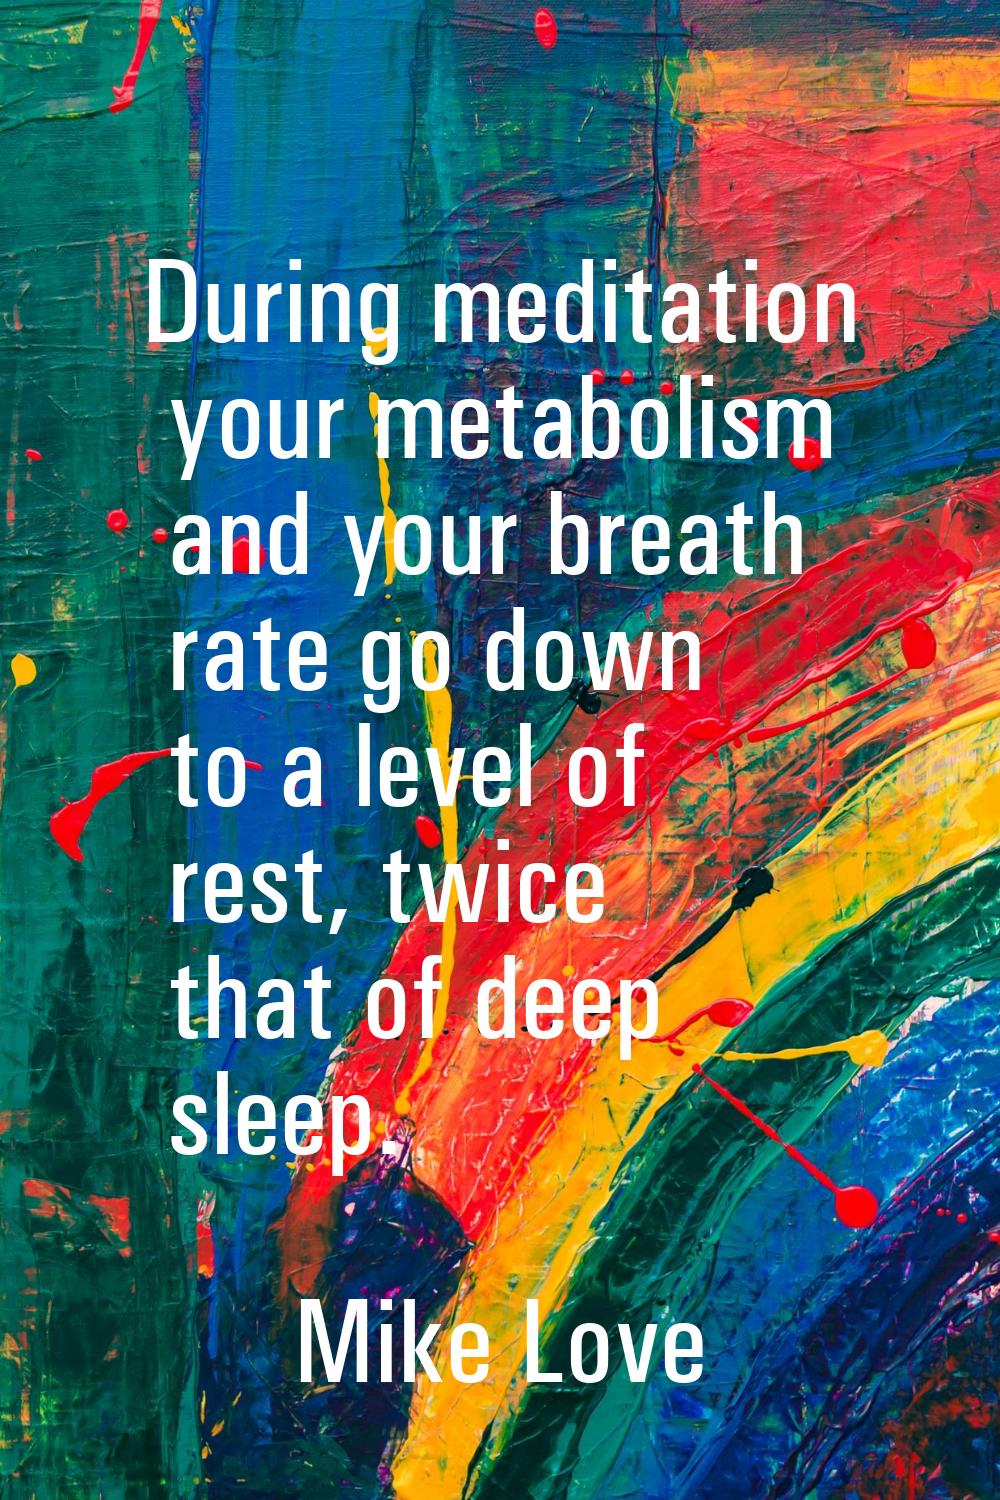 During meditation your metabolism and your breath rate go down to a level of rest, twice that of de